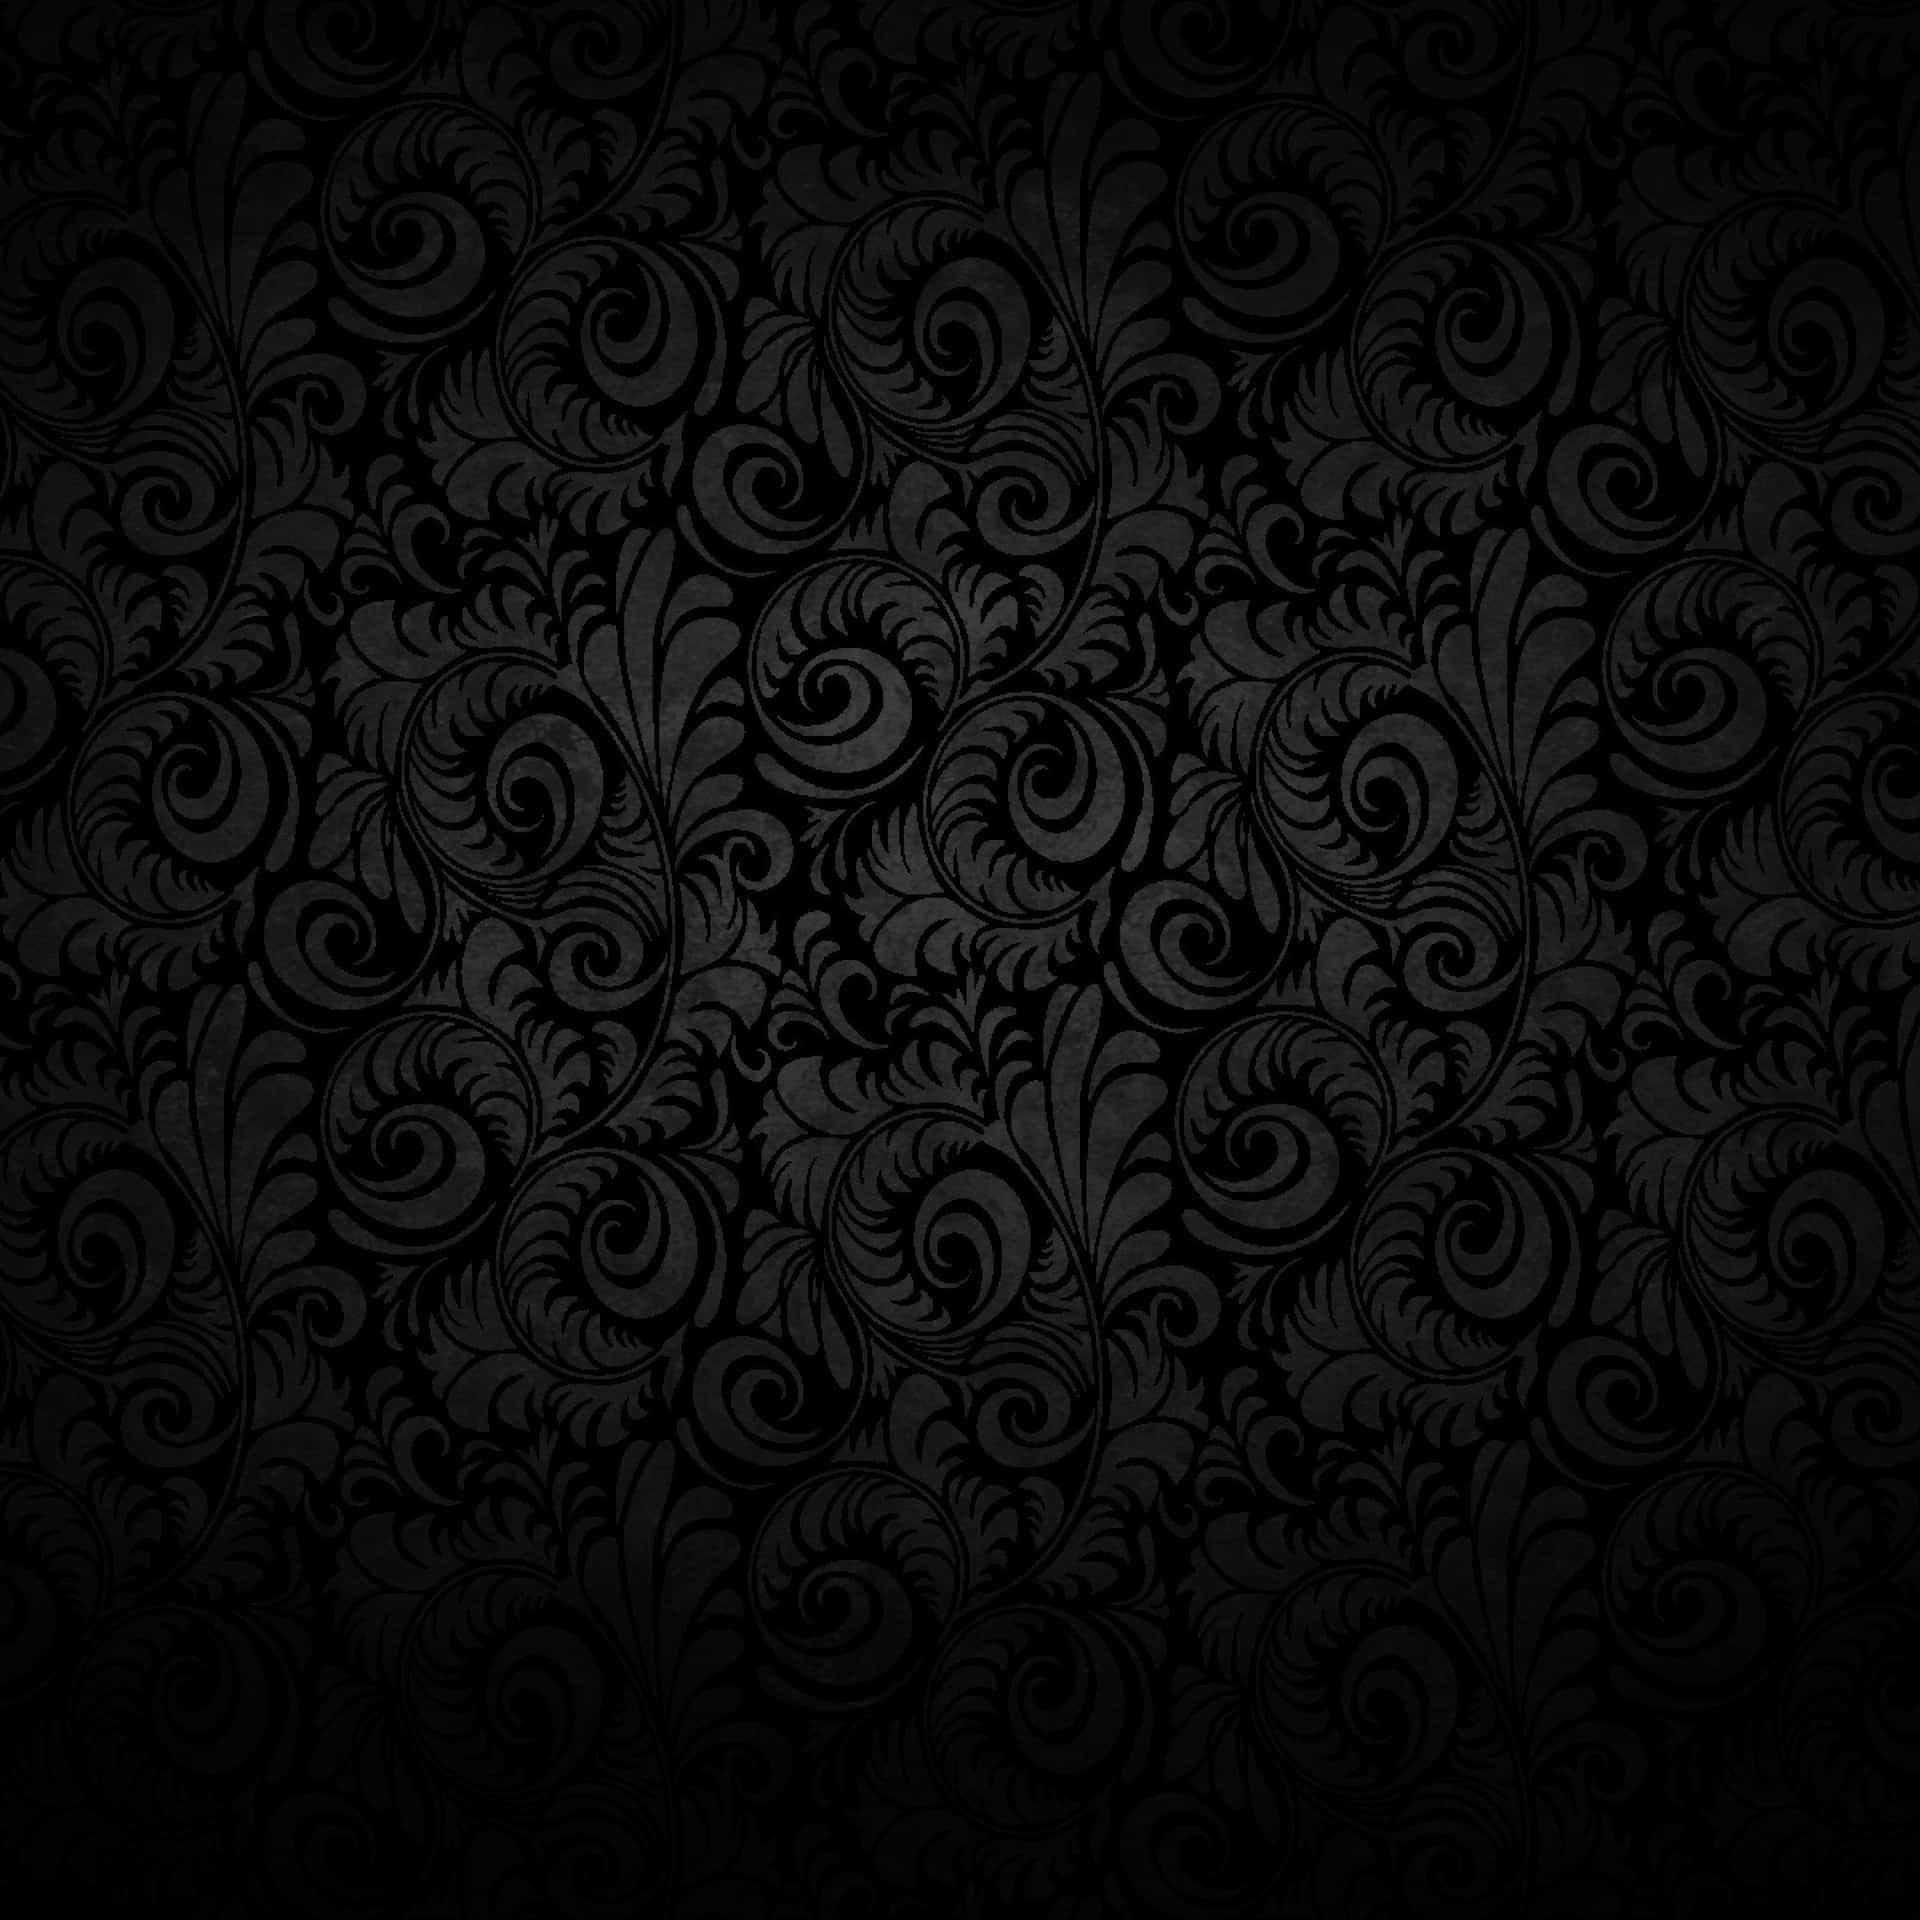 Black Ipad With Spiral Abstract Patterns Wallpaper